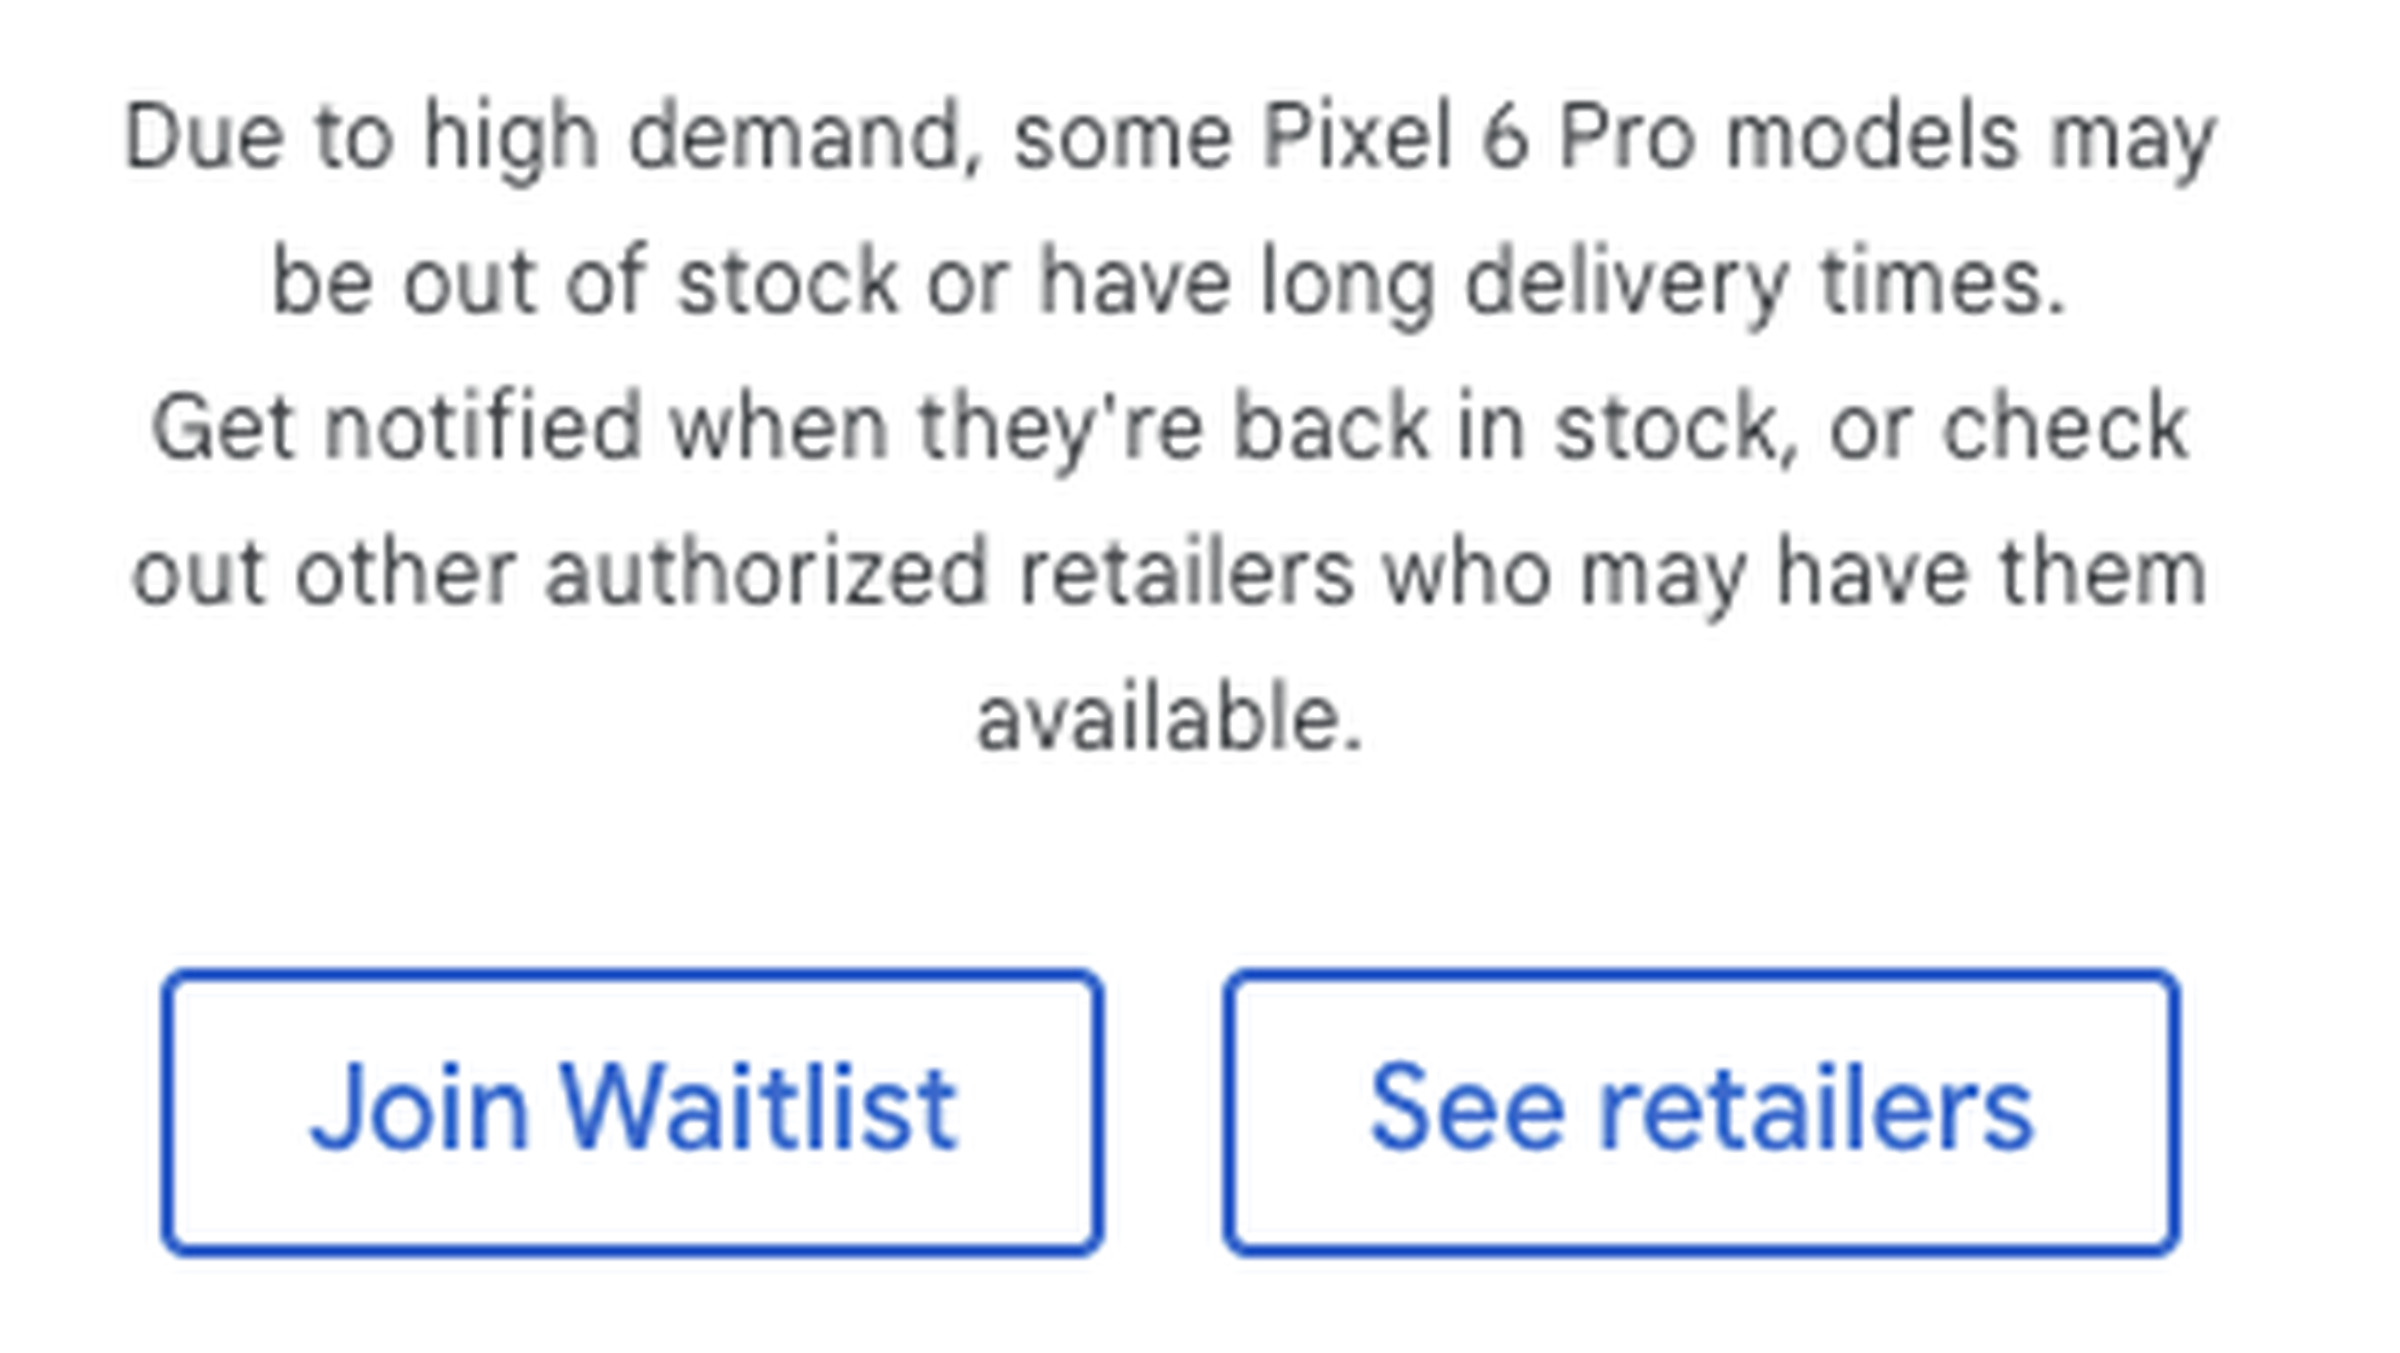 Google’s notice about Pixel 6 Pro inventory.